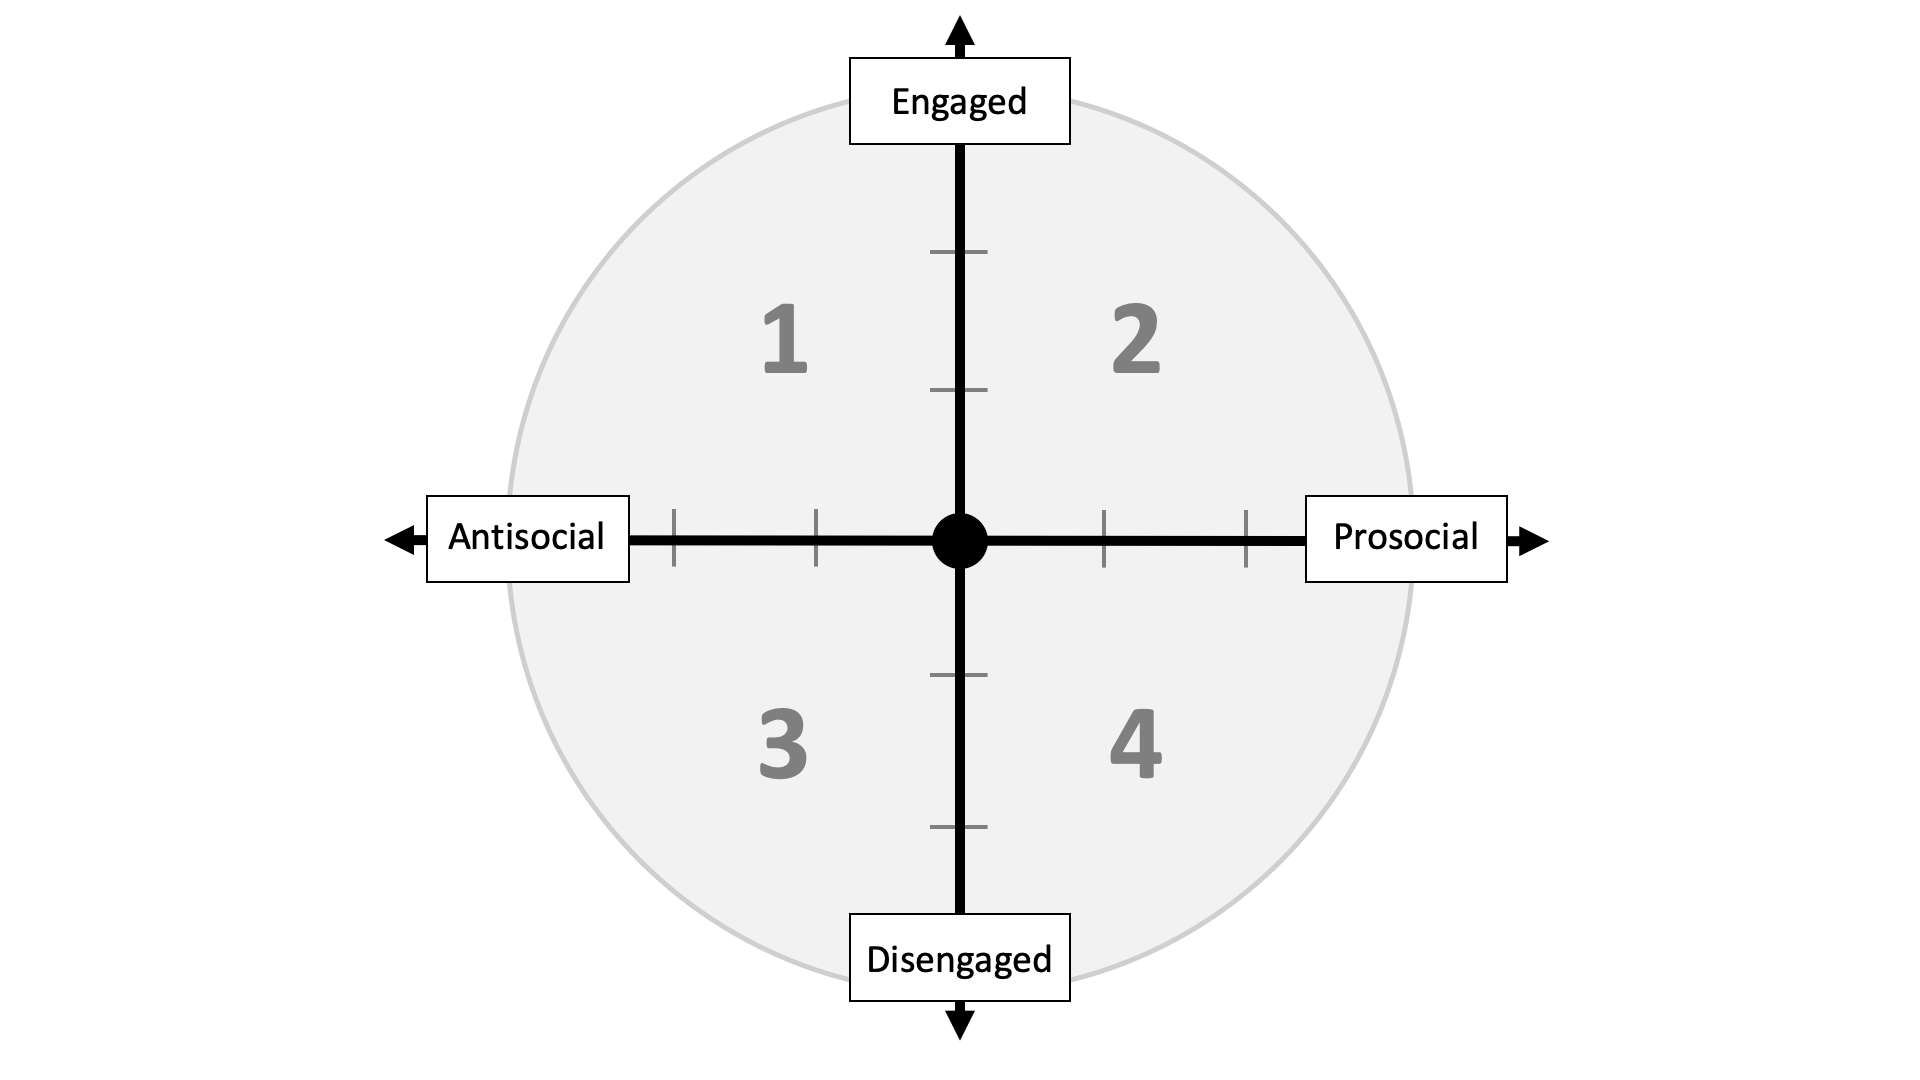 Conceptual figure of the bi-dimensional rejection taxonomy. The antisocial–prosocial x-axis refers to rejection responses that function to reduce (antisocial) or promote (prosocial) social connection. The engaged–disengaged y-axis represents engaged (direct, active, “hands-on,” approach-based) and disengaged (indirect, passive, “hands-off,” avoidance-based) attempts to cope with the stressor (the current or future need-threat elicited by the rejection experience). The numbers in the figure represent quadrants: Quadrant 1 (engaged antisocial responses), Quadrant 2 (engaged prosocial responses), Quadrant 3 (disengaged antisocial responses), and Quadrant 4 (disengaged prosocial responses).